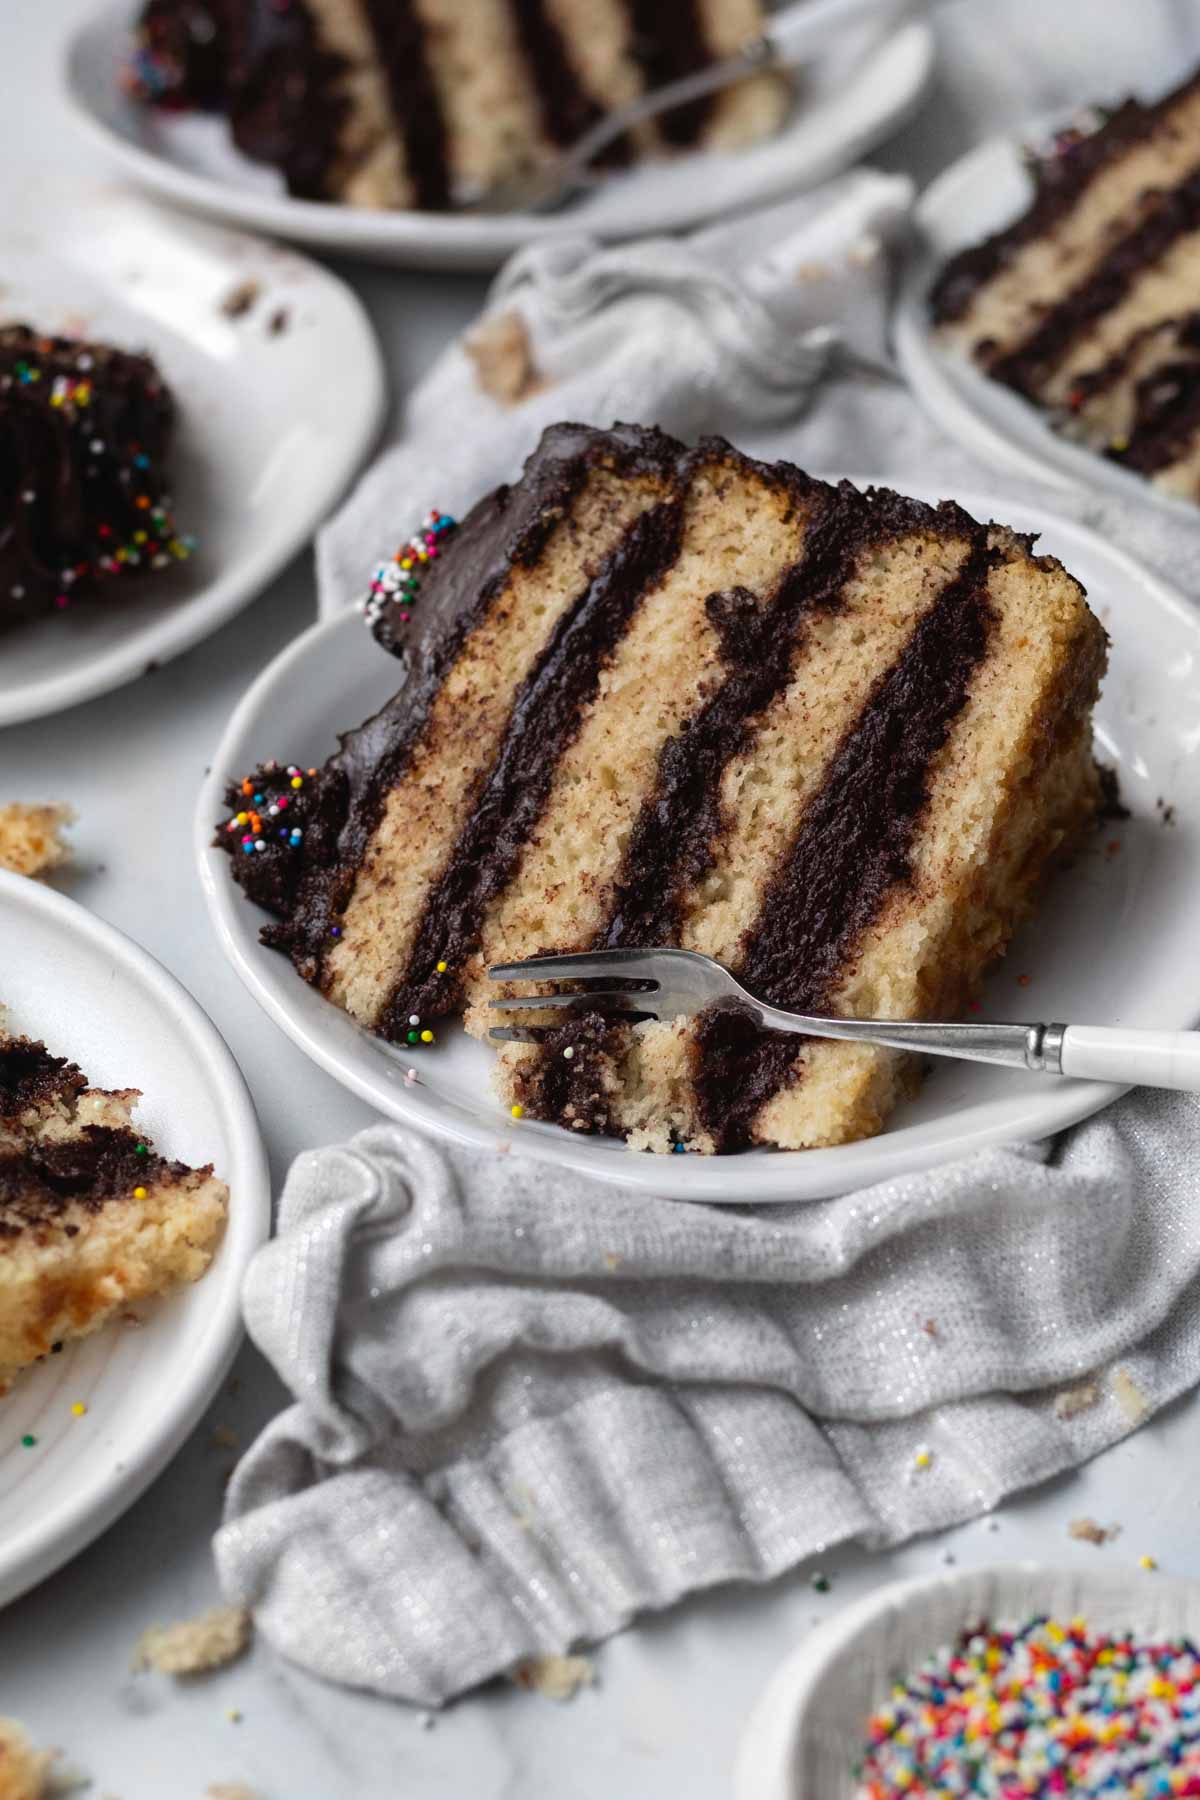 A fork takes a bit of a slice of the cake.